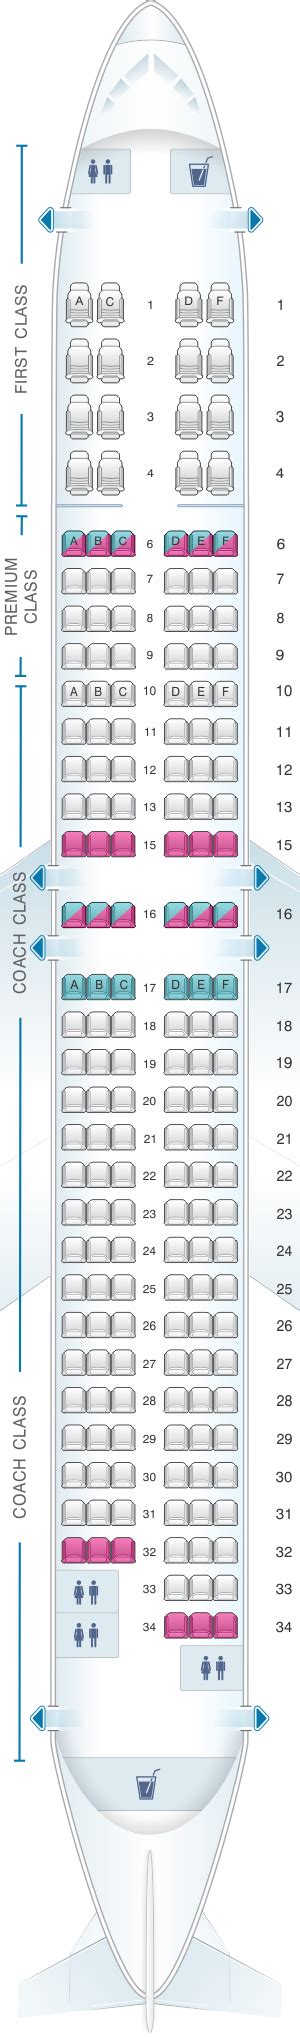 Alaska Airlines Seating Chart Two Birds Home